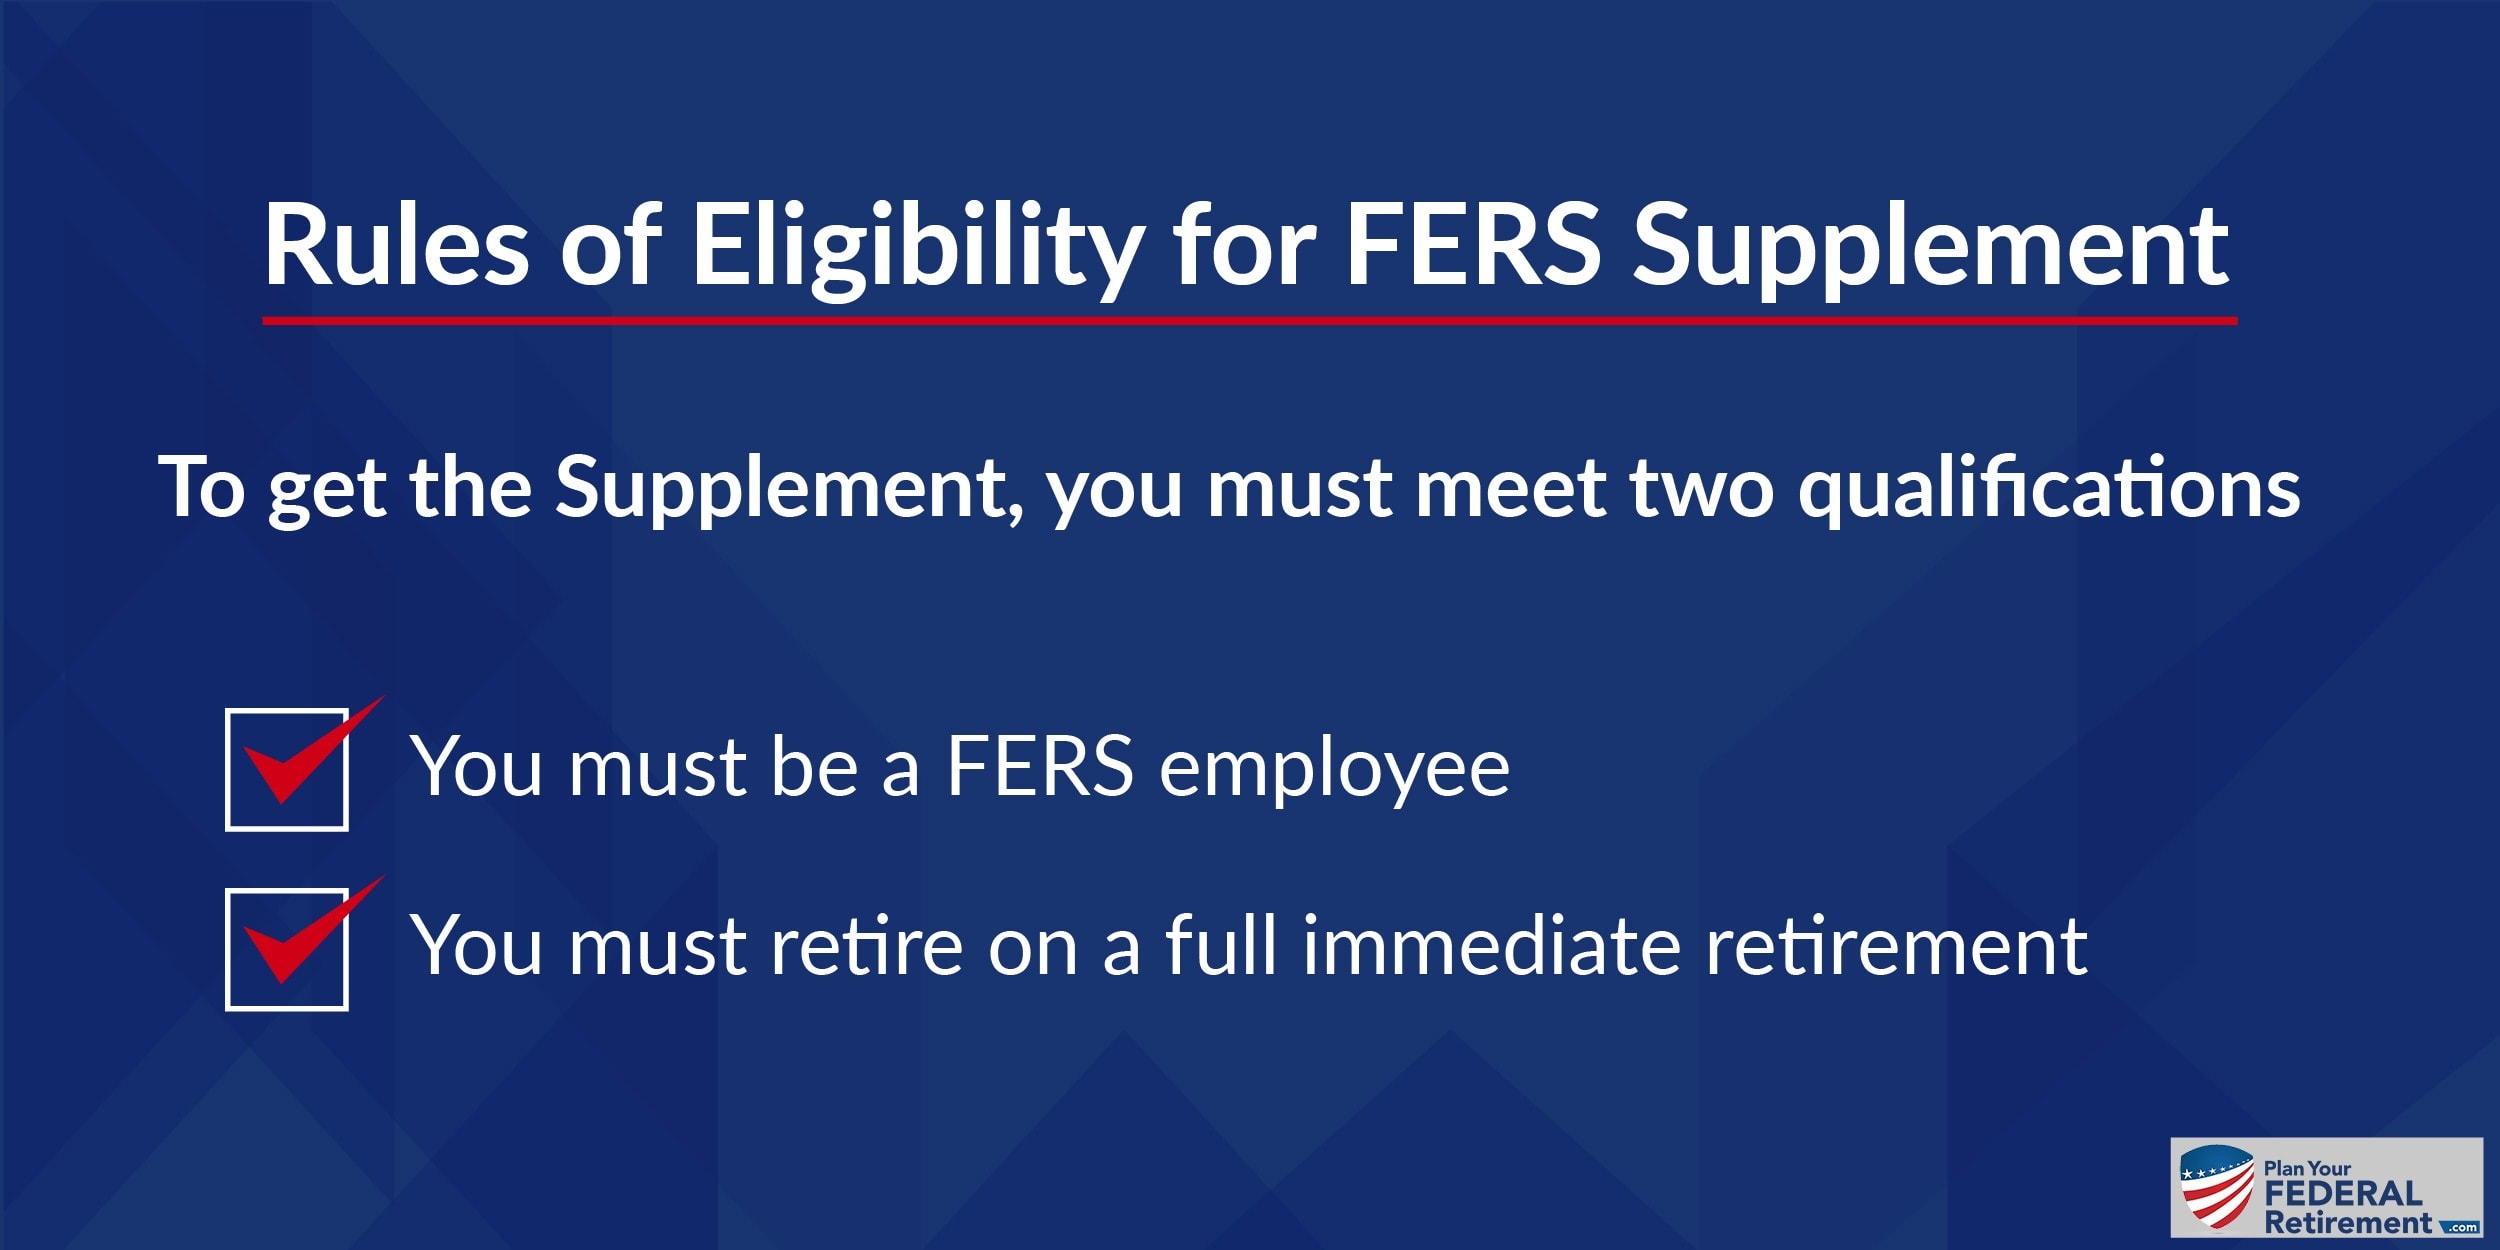 How to qualify for FERS Supplement